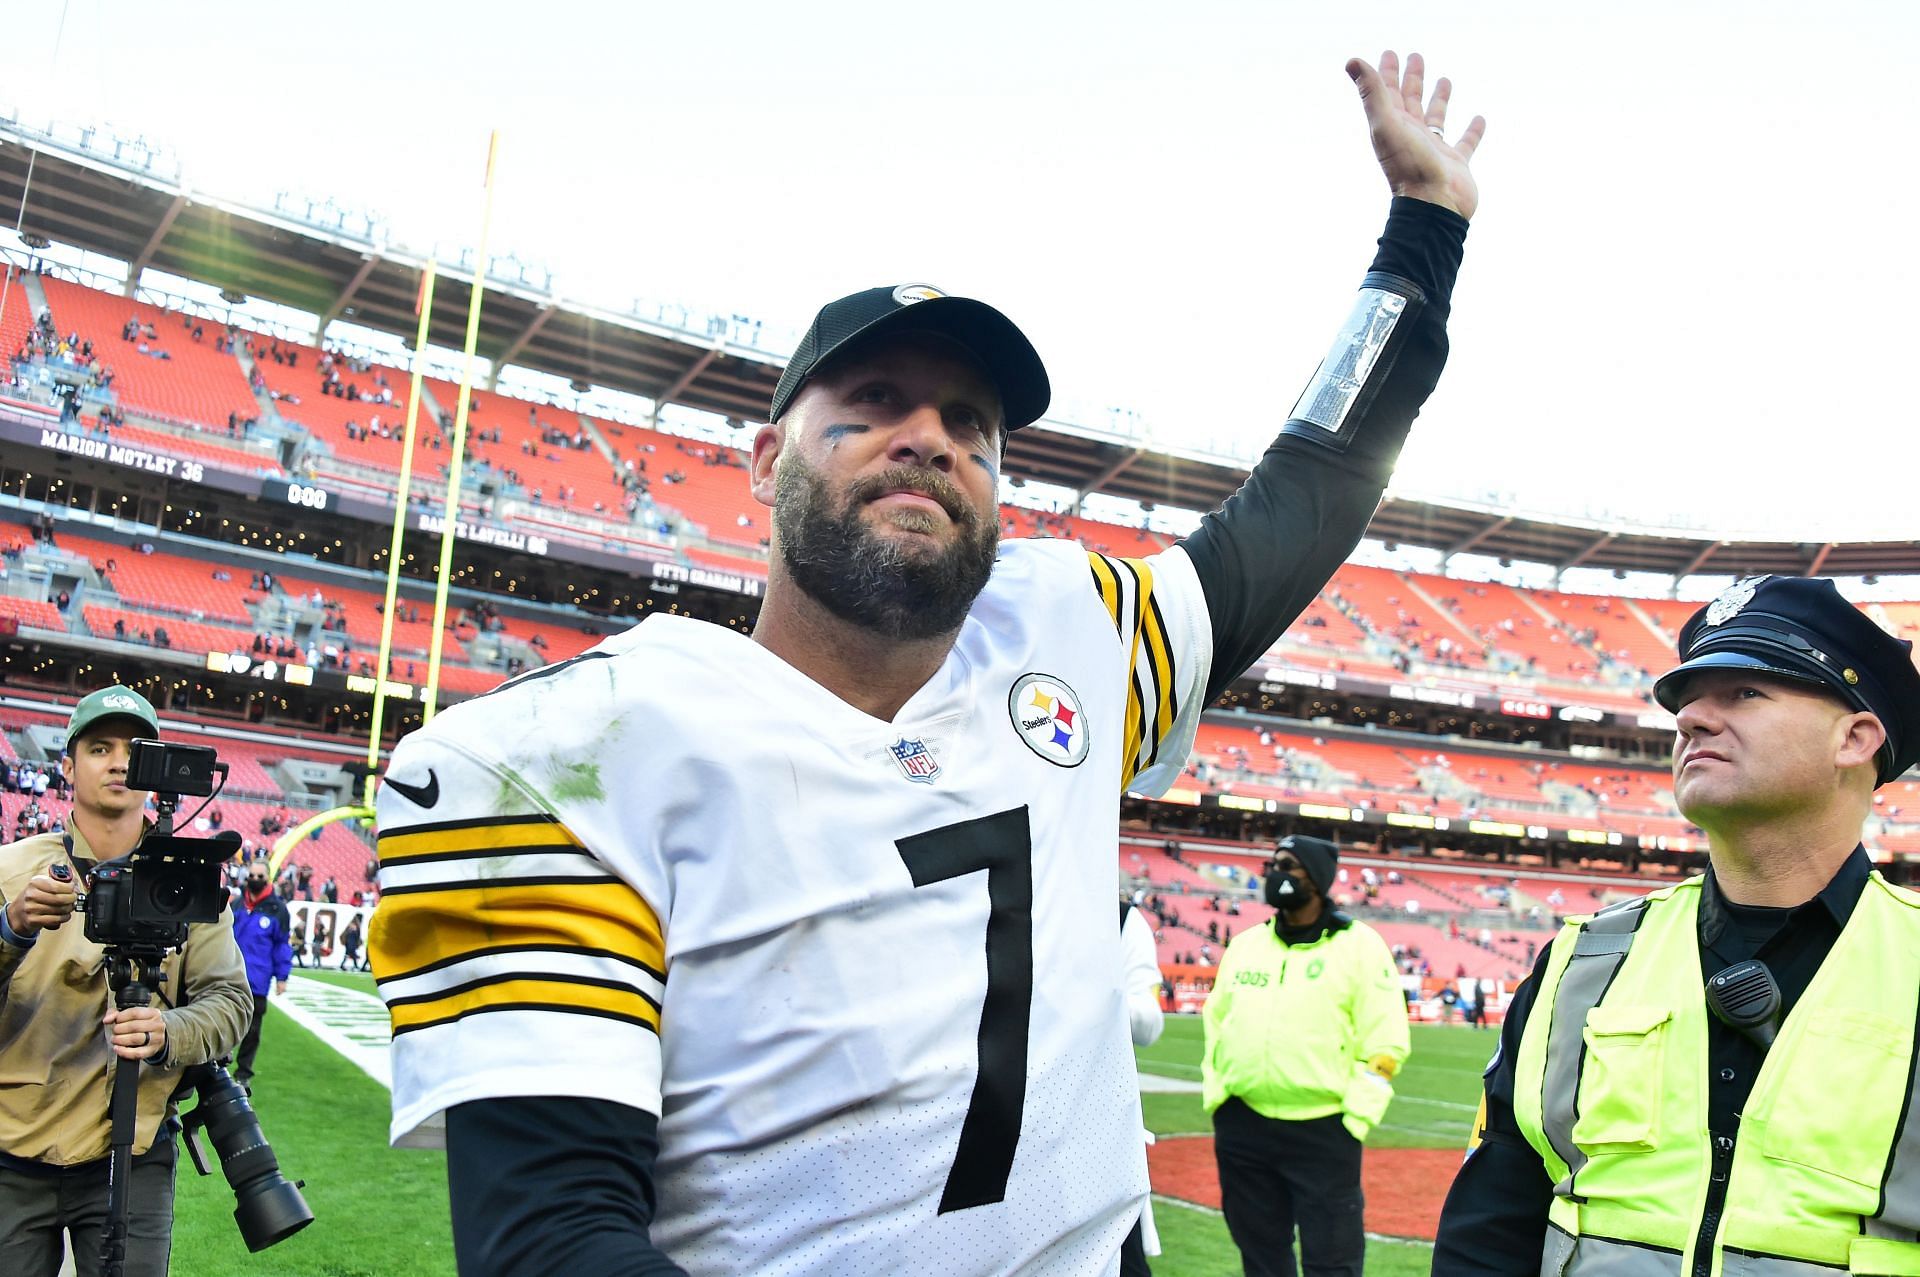 Former Pittsburgh Steelers Ben Roethlisberger believes he could come back and play today.